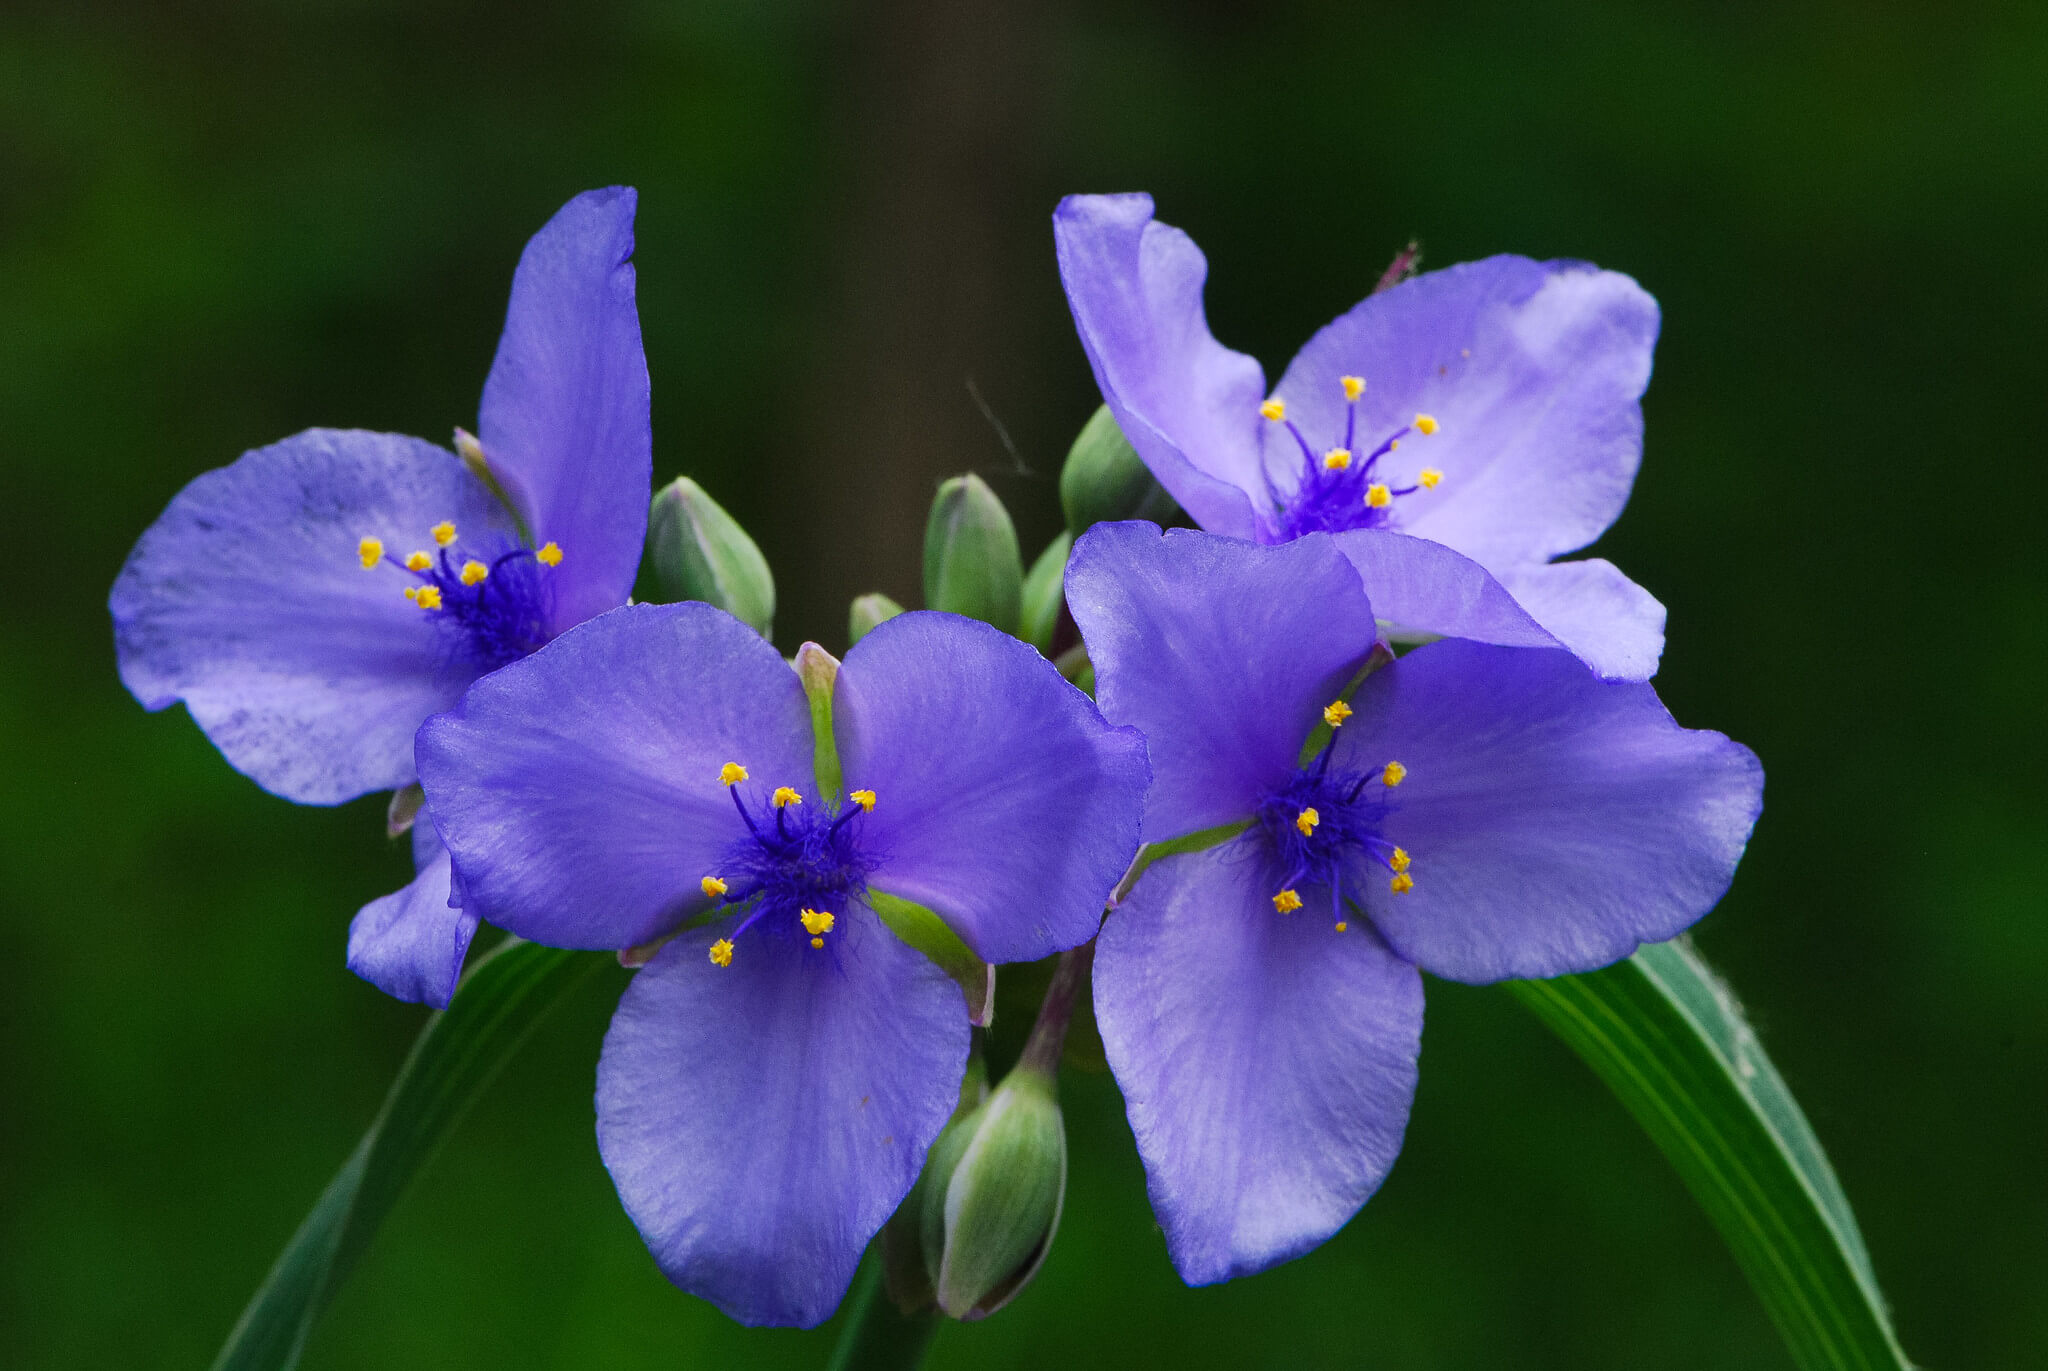 Spiderwort in bloom. Natural resources like these thrive on lands protected by the Knowles-Nelson Stewardship Program.